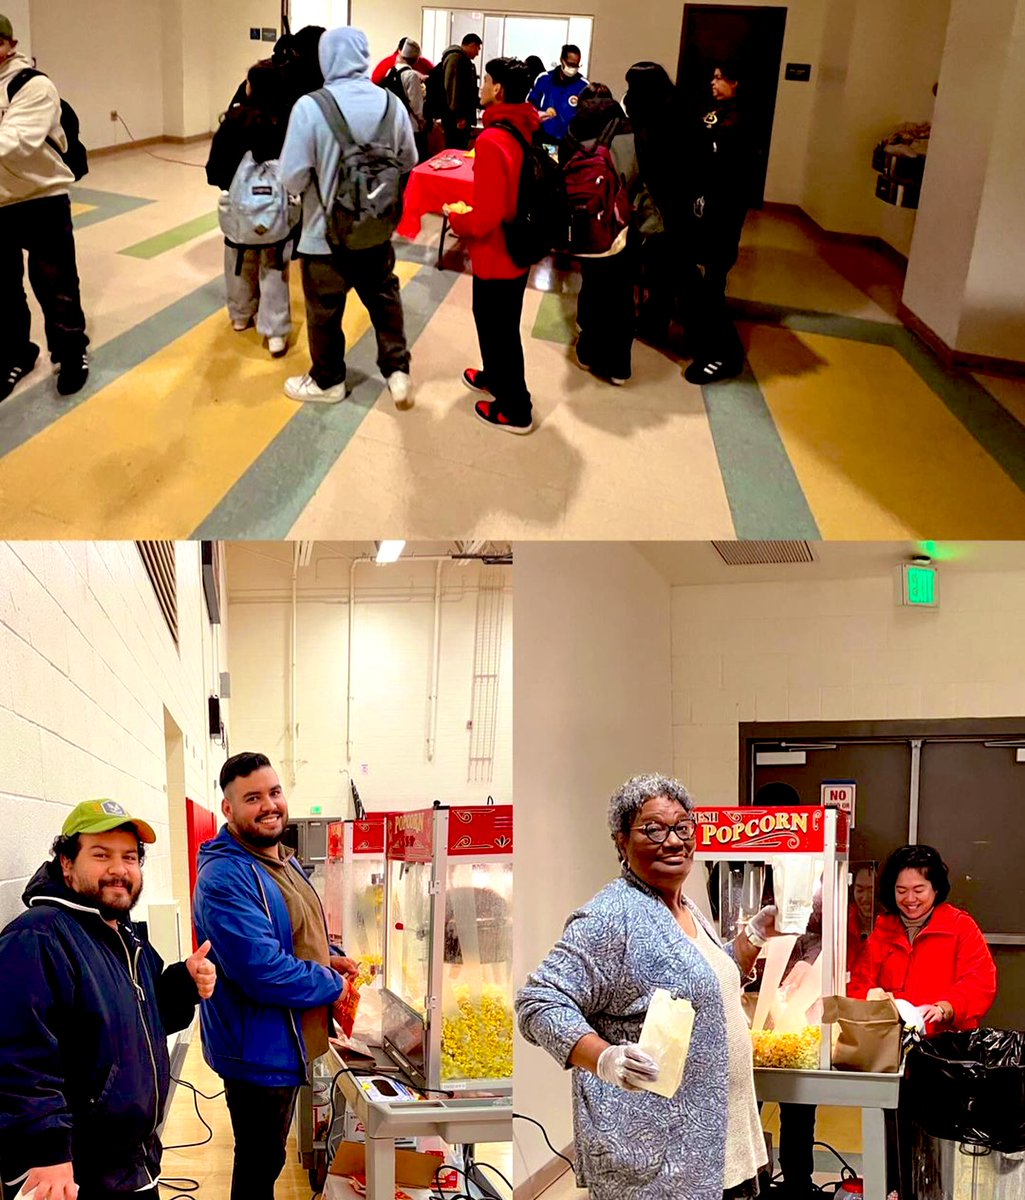 🥳 Happy 100th Day of School Challengers! 🎉 At #DymallyBiomedMagnet, we thank you for keeping it 💯 🙌🏽 by coming to school every day! We hope you enjoyed your popcorn, nachos & special prizes! 🎡 🍿 😋 #100DaysOfSchool #100thDayOfSchool #100DaysSmarter
@dymallyhs 
@DymallySh